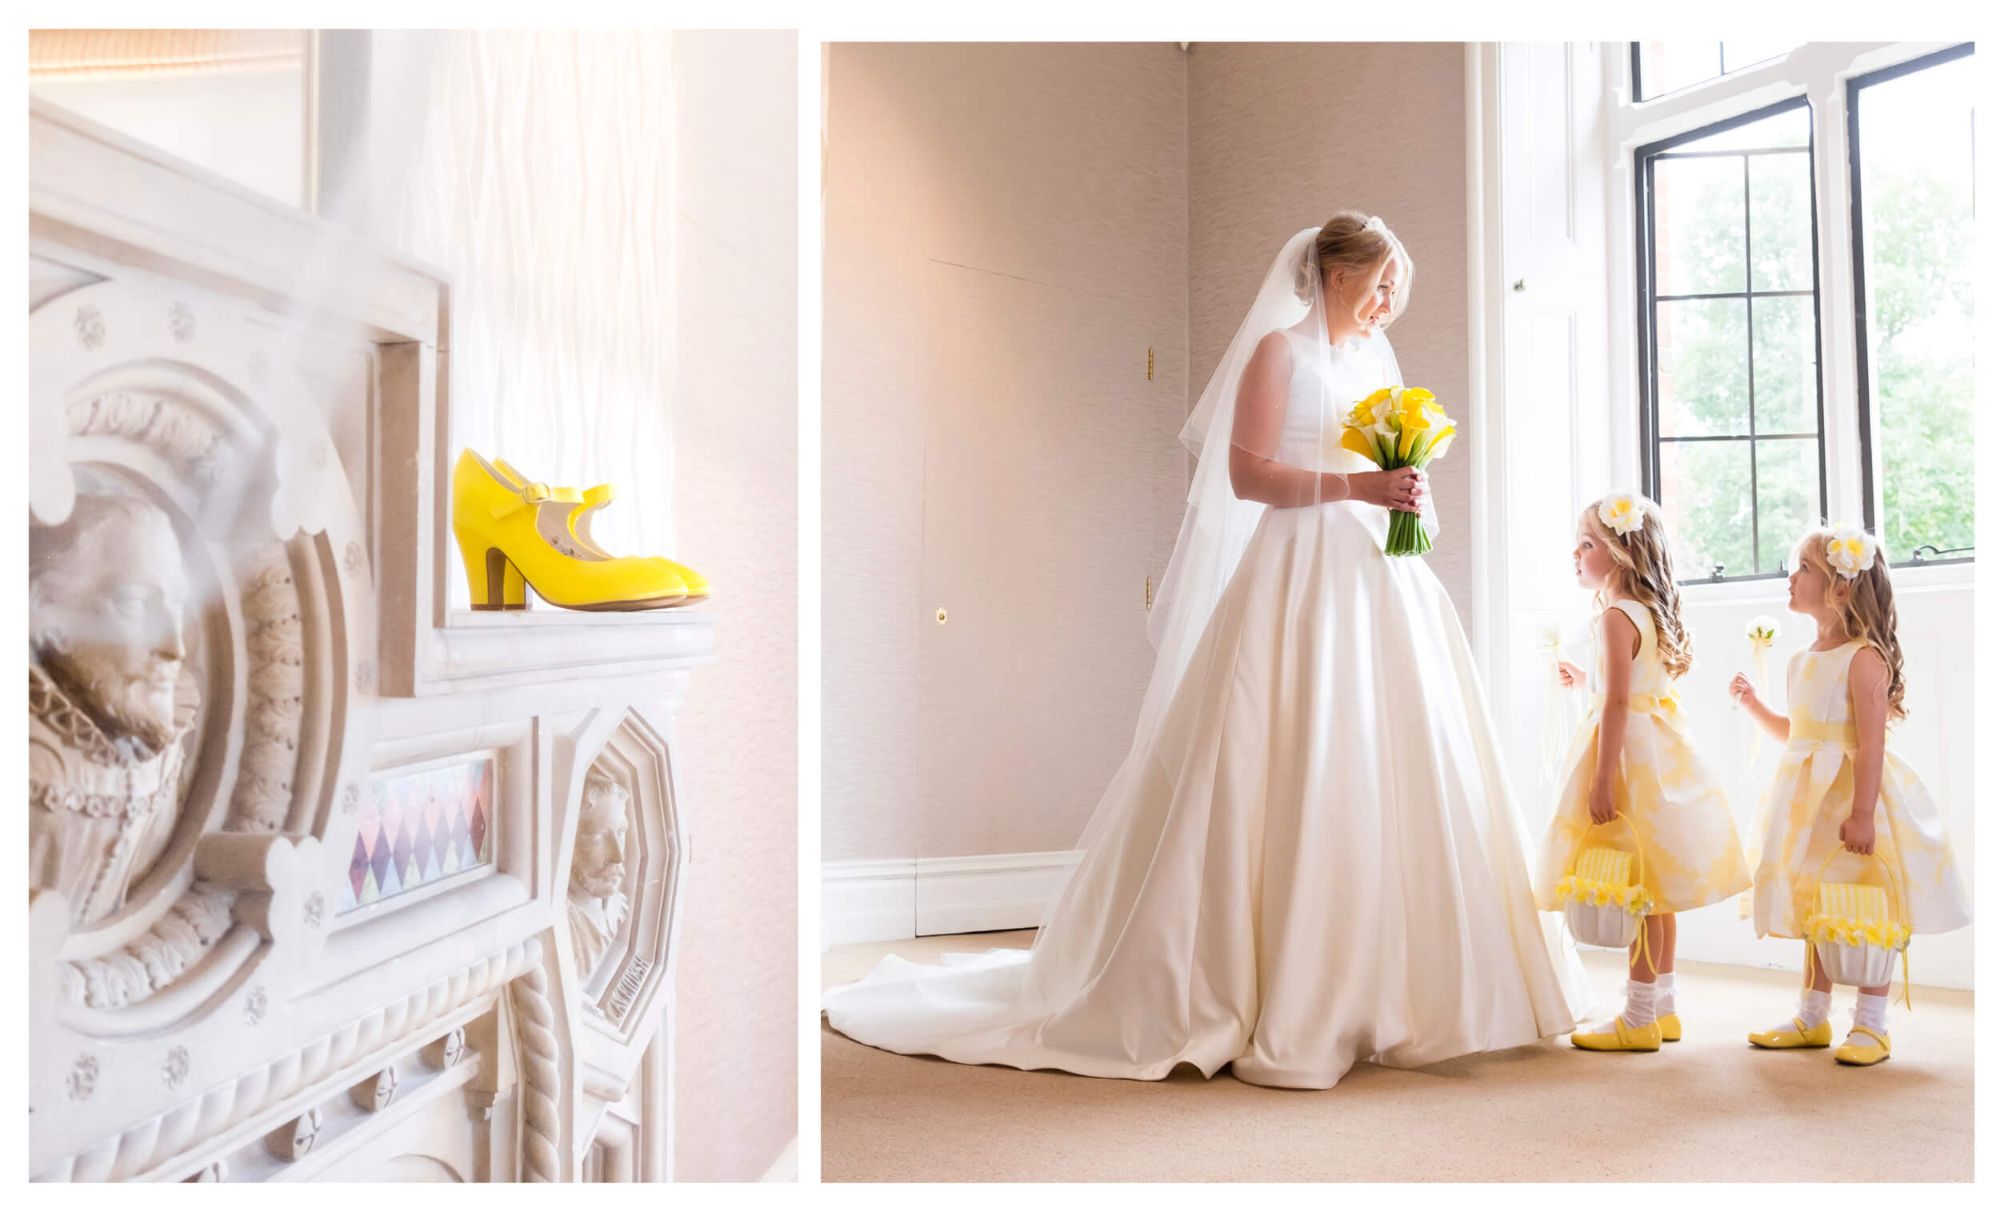 Kismet Photography - Wedding Photography in Wiltshire - Love That Wedding!